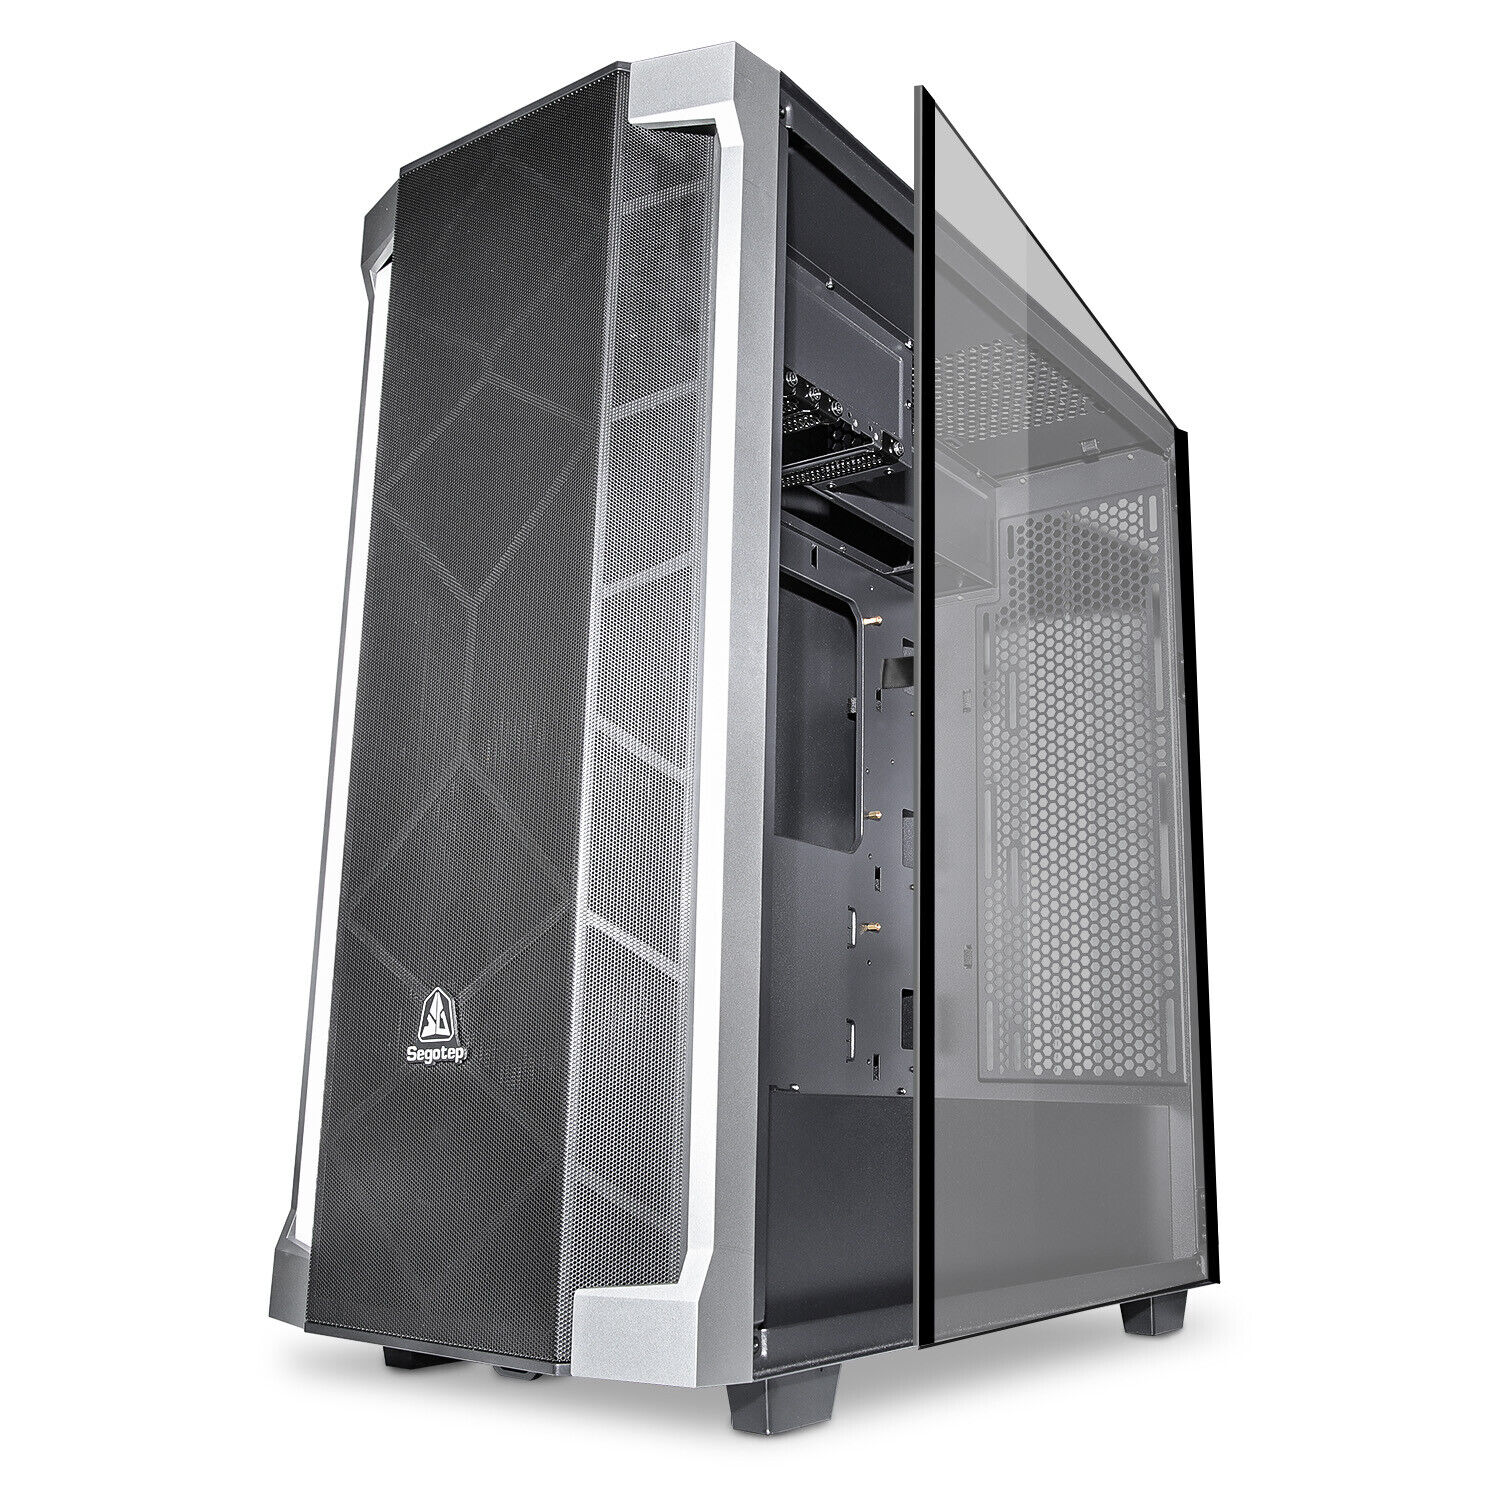 Segotep T1 E-ATX Black Full-Tower PC Gaming Case Tempered Glass Side Panel